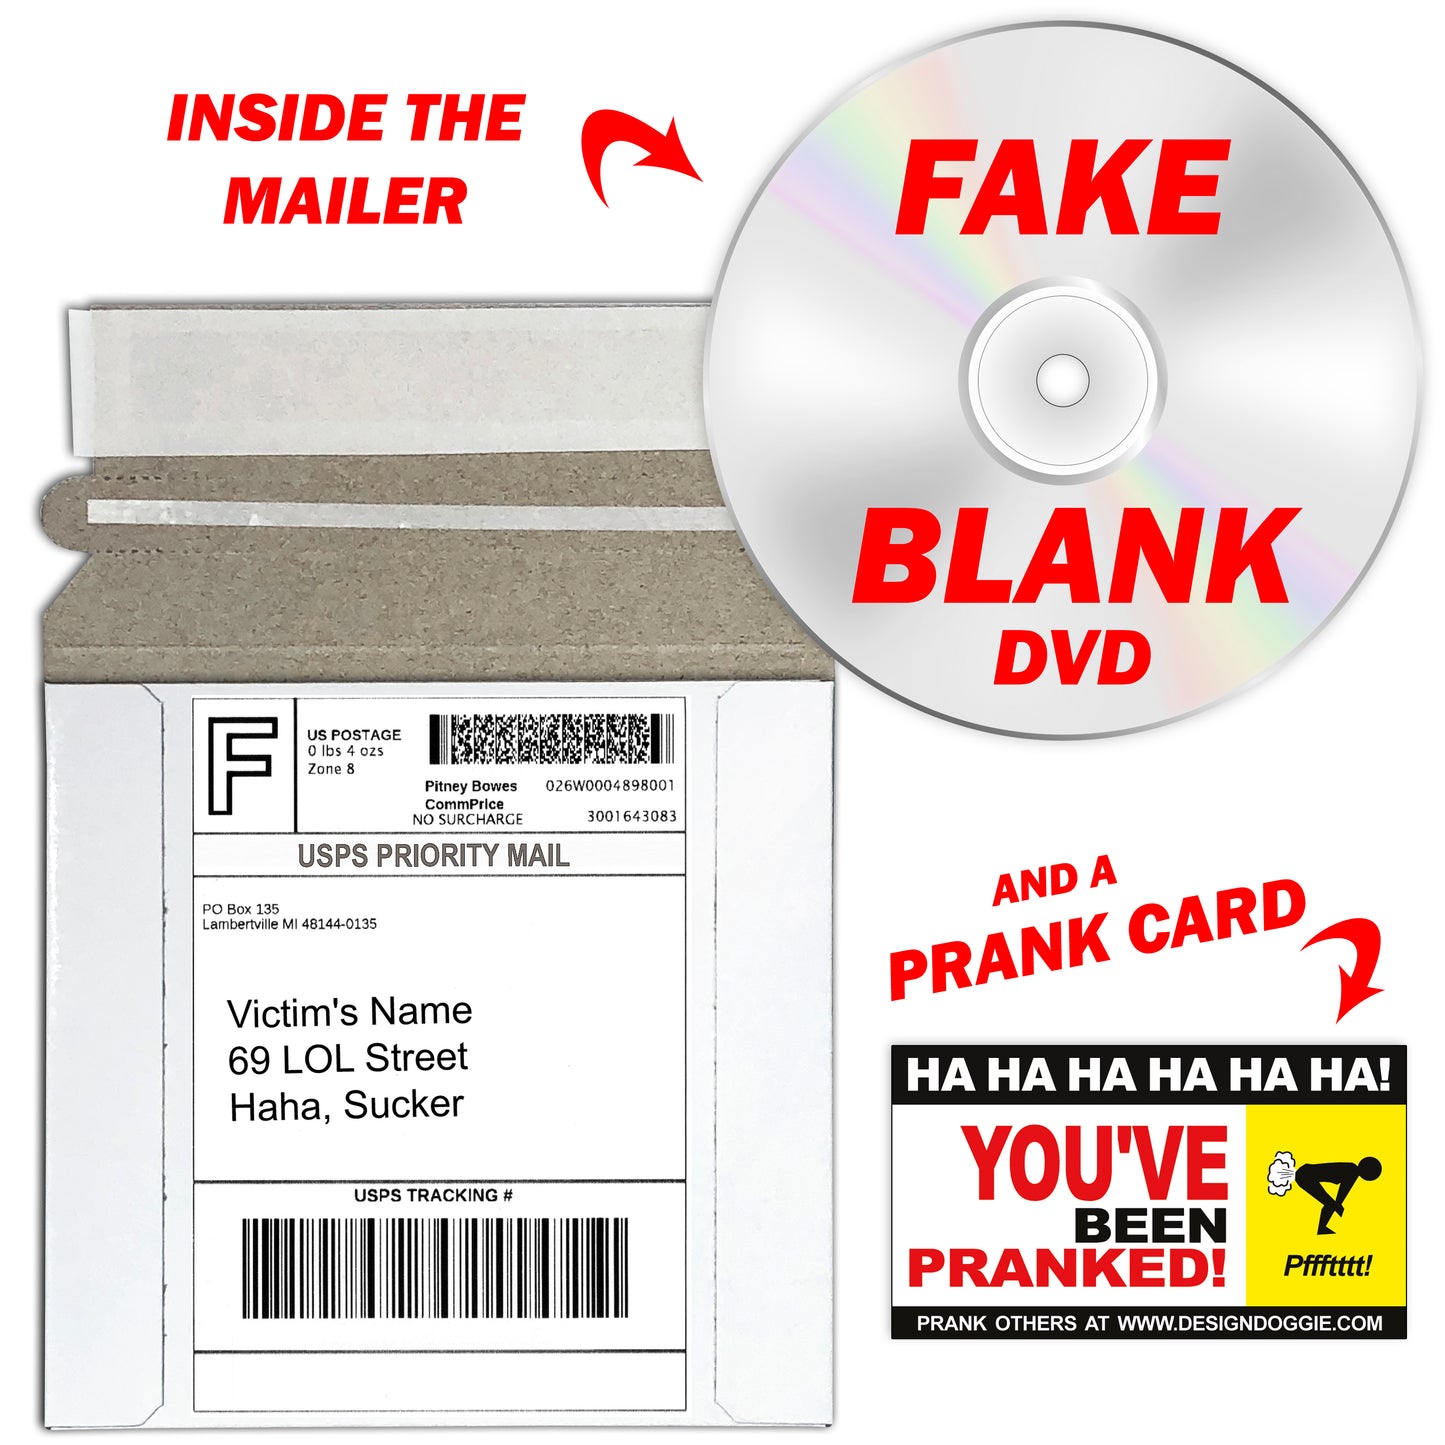 Moobs Man Boobs Fake DVD mail prank gets sent directly to your victims 100% anonymously!